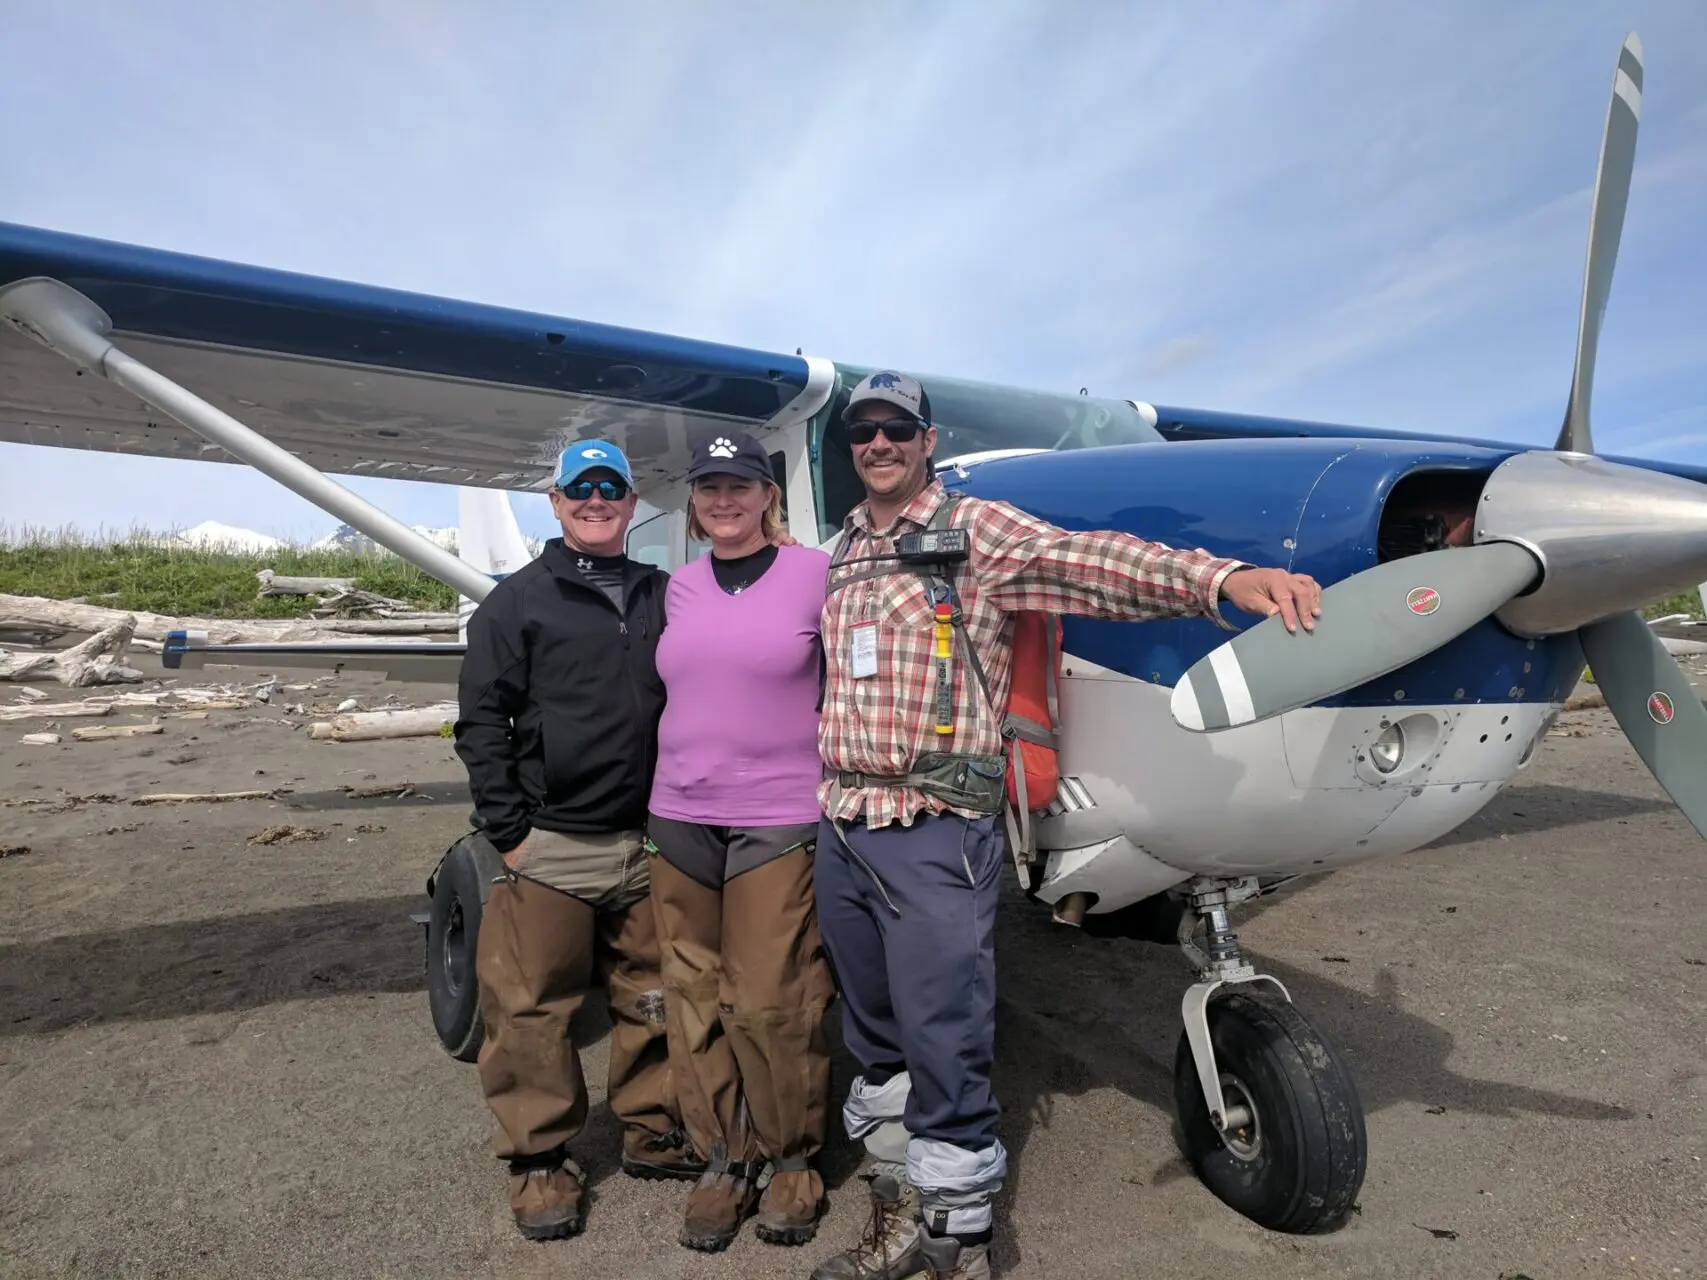 Three people standing in front of a small plane.